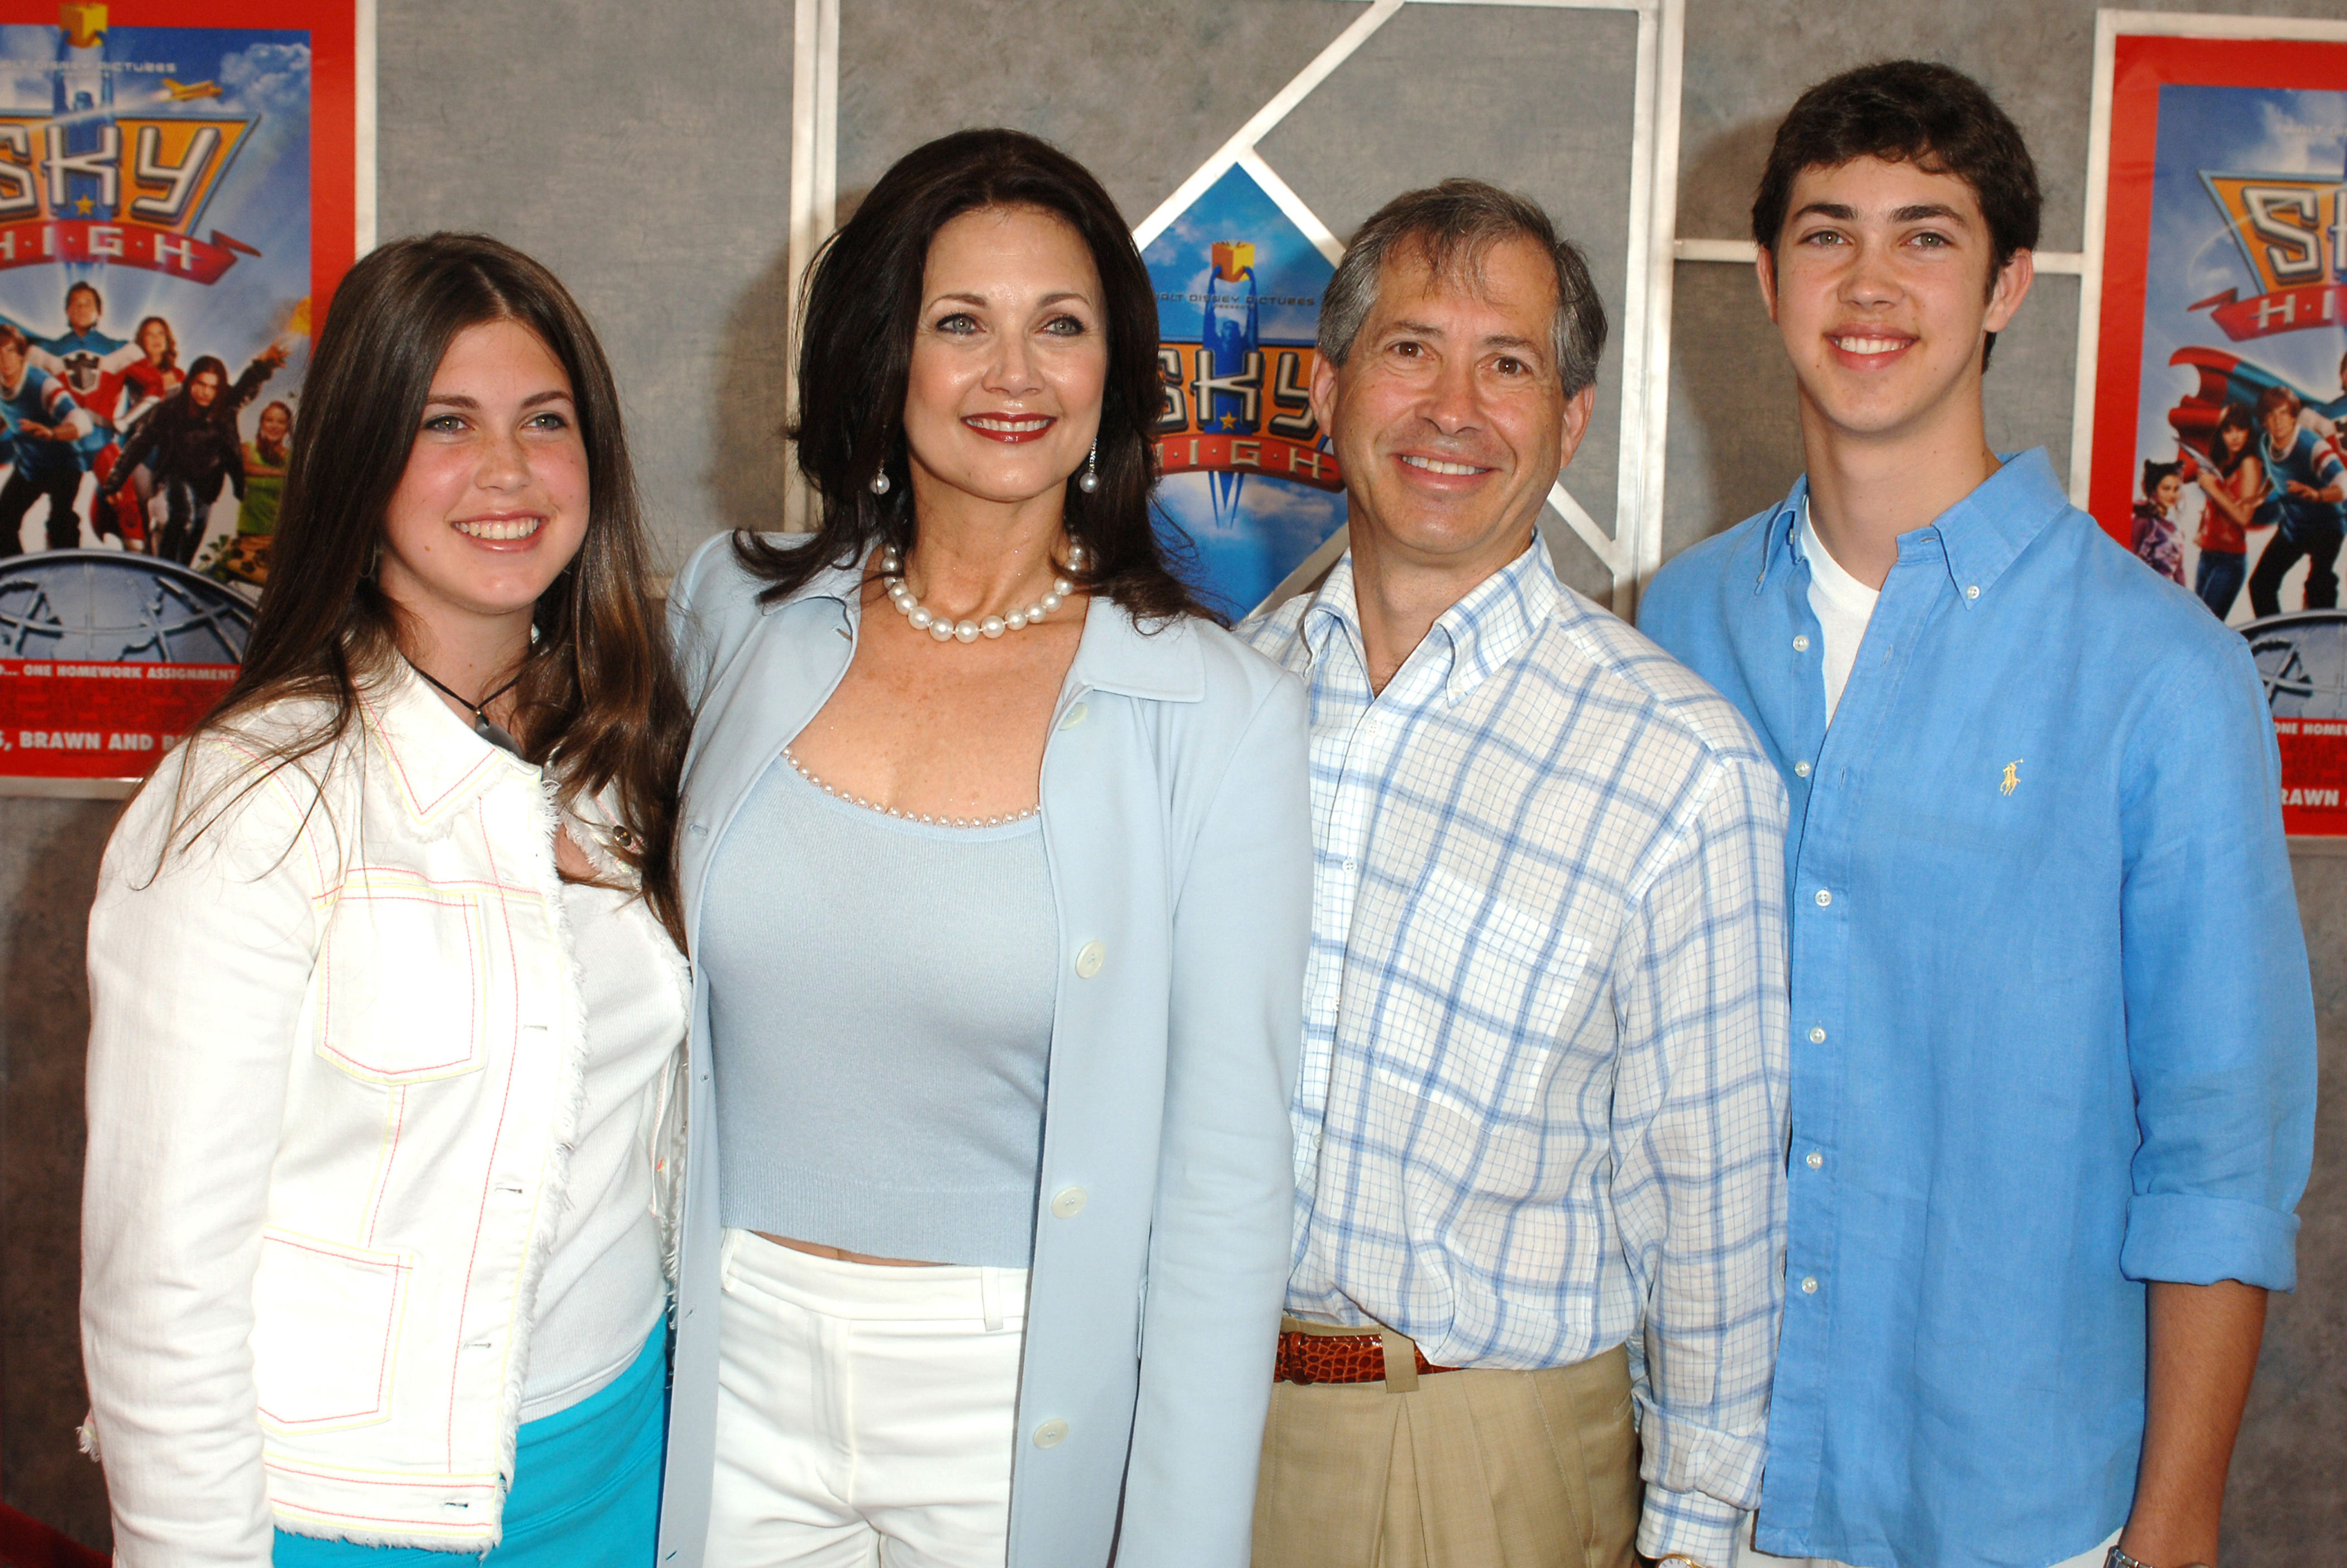 <p>Back in 2005, "Wonder Woman" star Lynda Carter brought her family -- kids Jessica and James Altman (who were just teens at the time) and husband Robert A. Altman, a high-powered Washington D.C. attorney -- to Los Angeles from their home in Maryland to attend the premiere of "Sky High."</p>